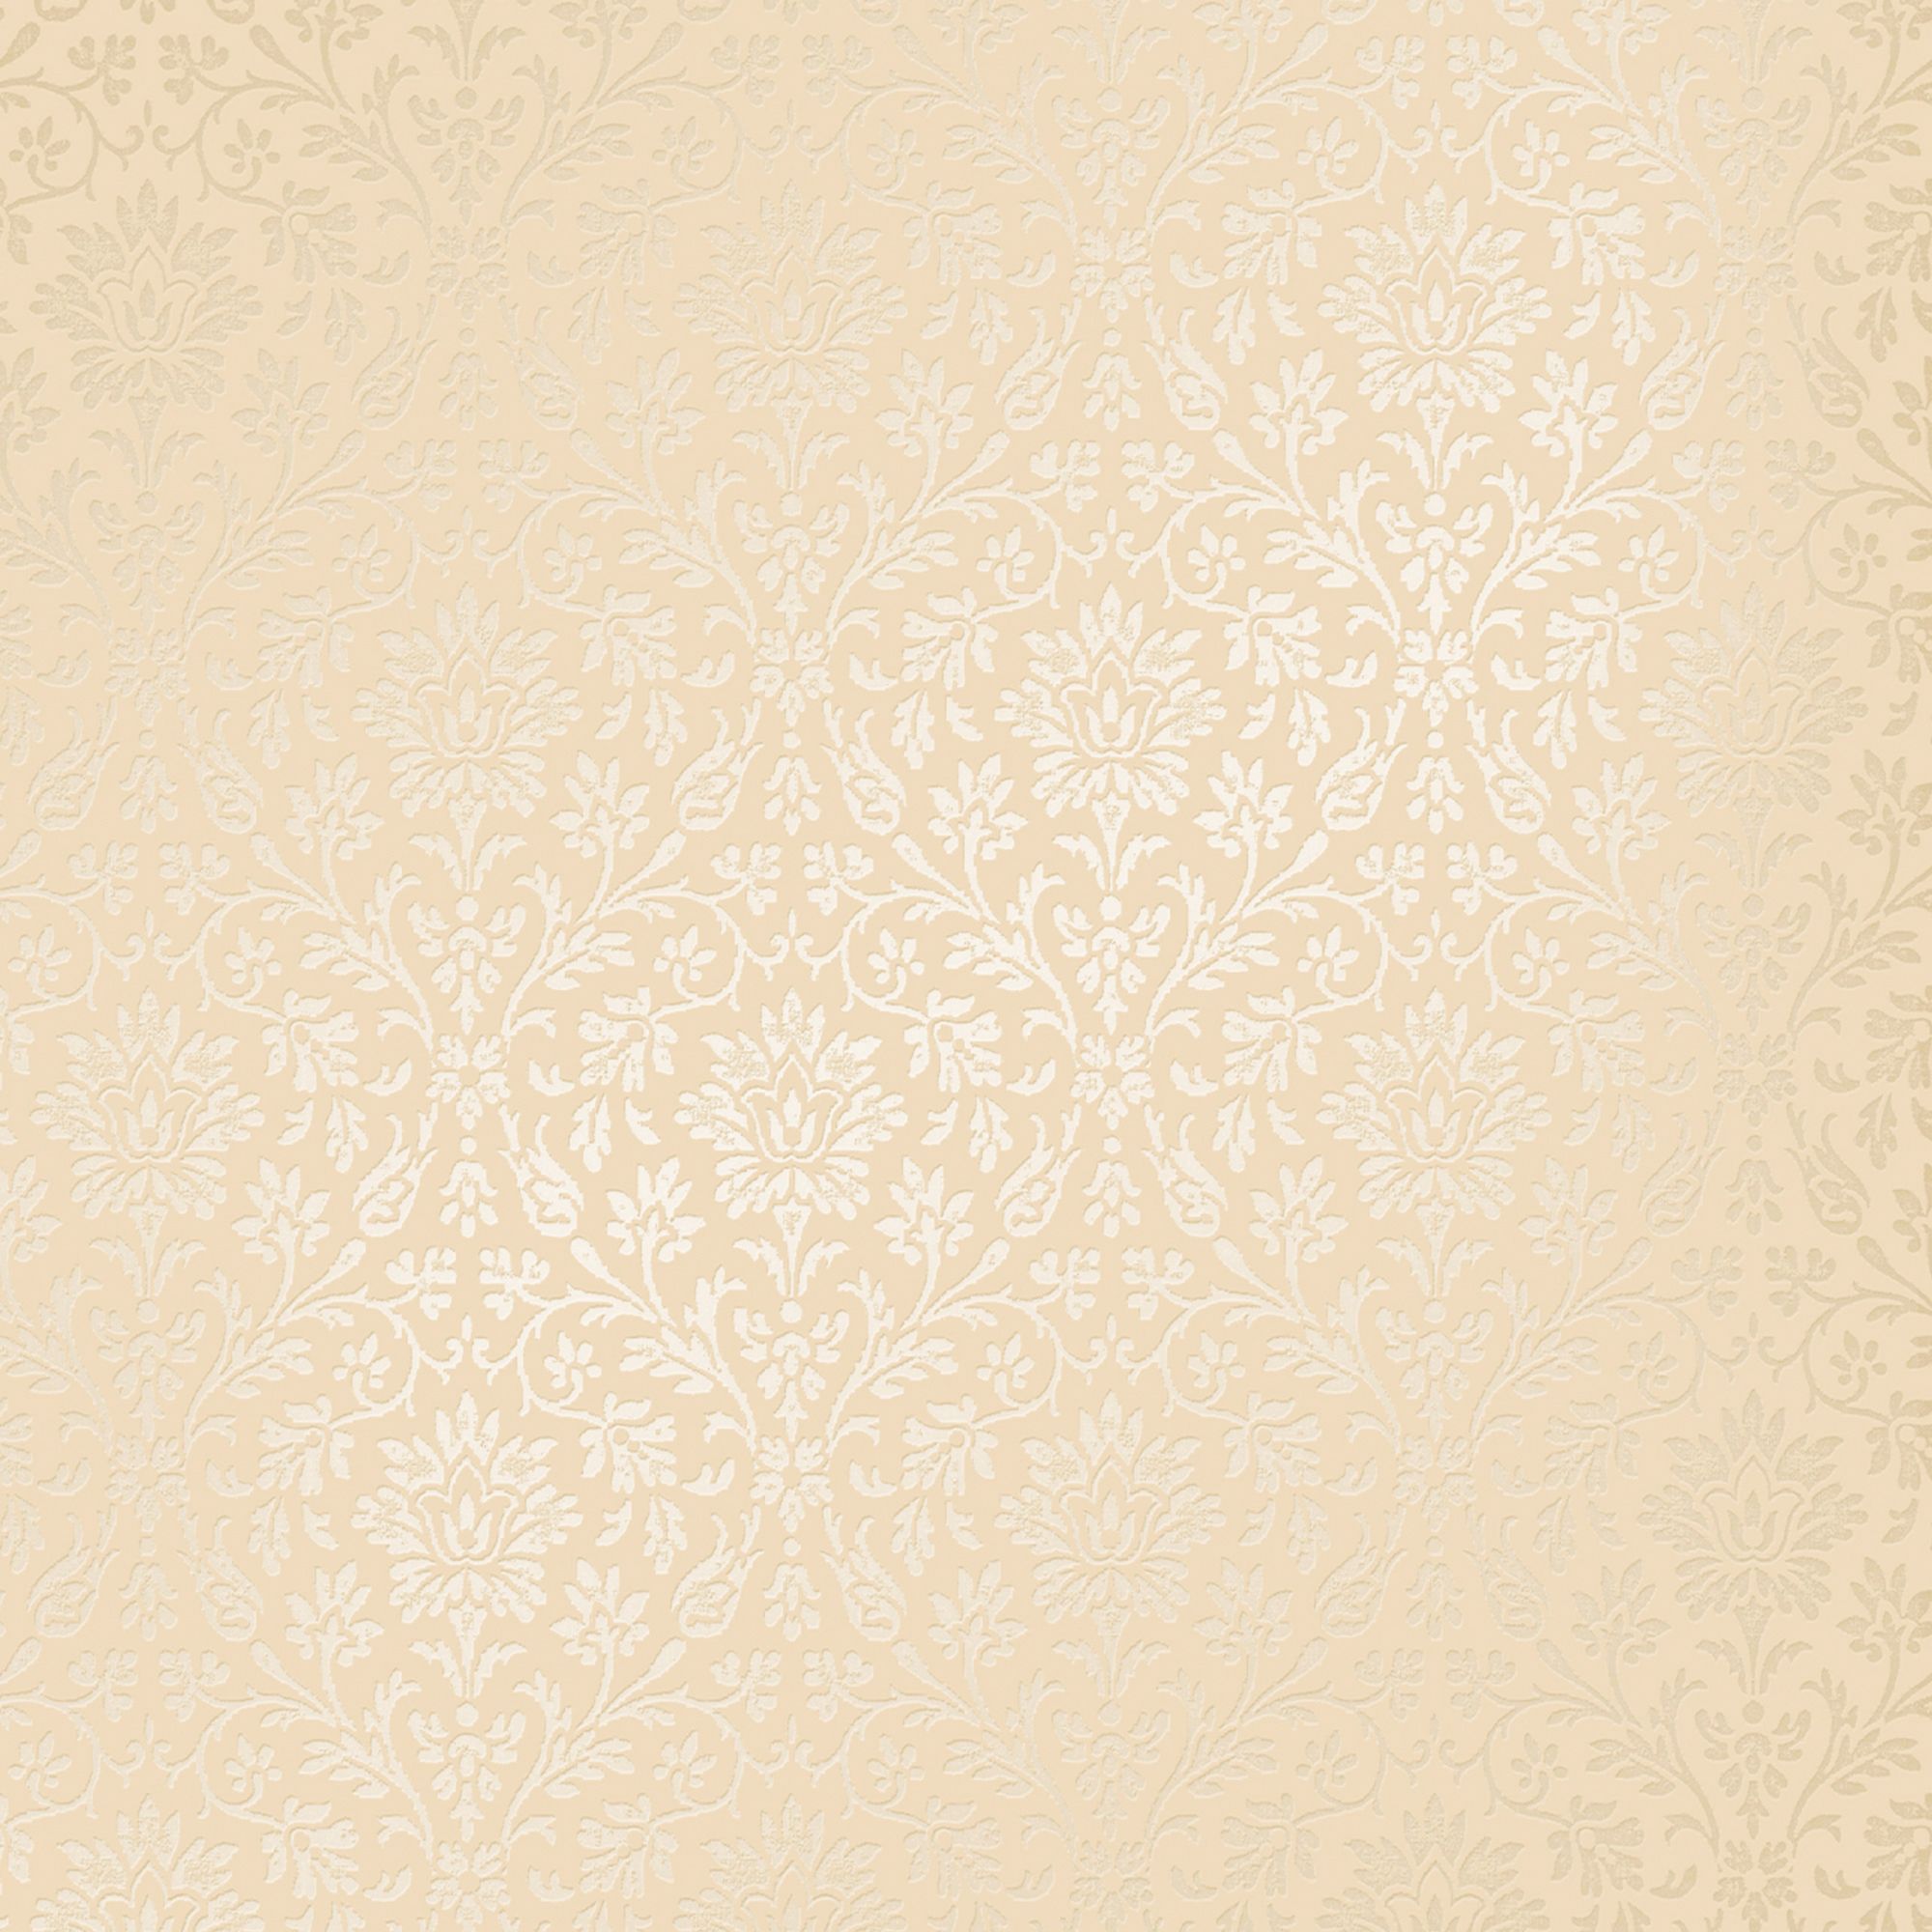 Laura Ashley Annecy Linen Damask Smooth Wallpaper